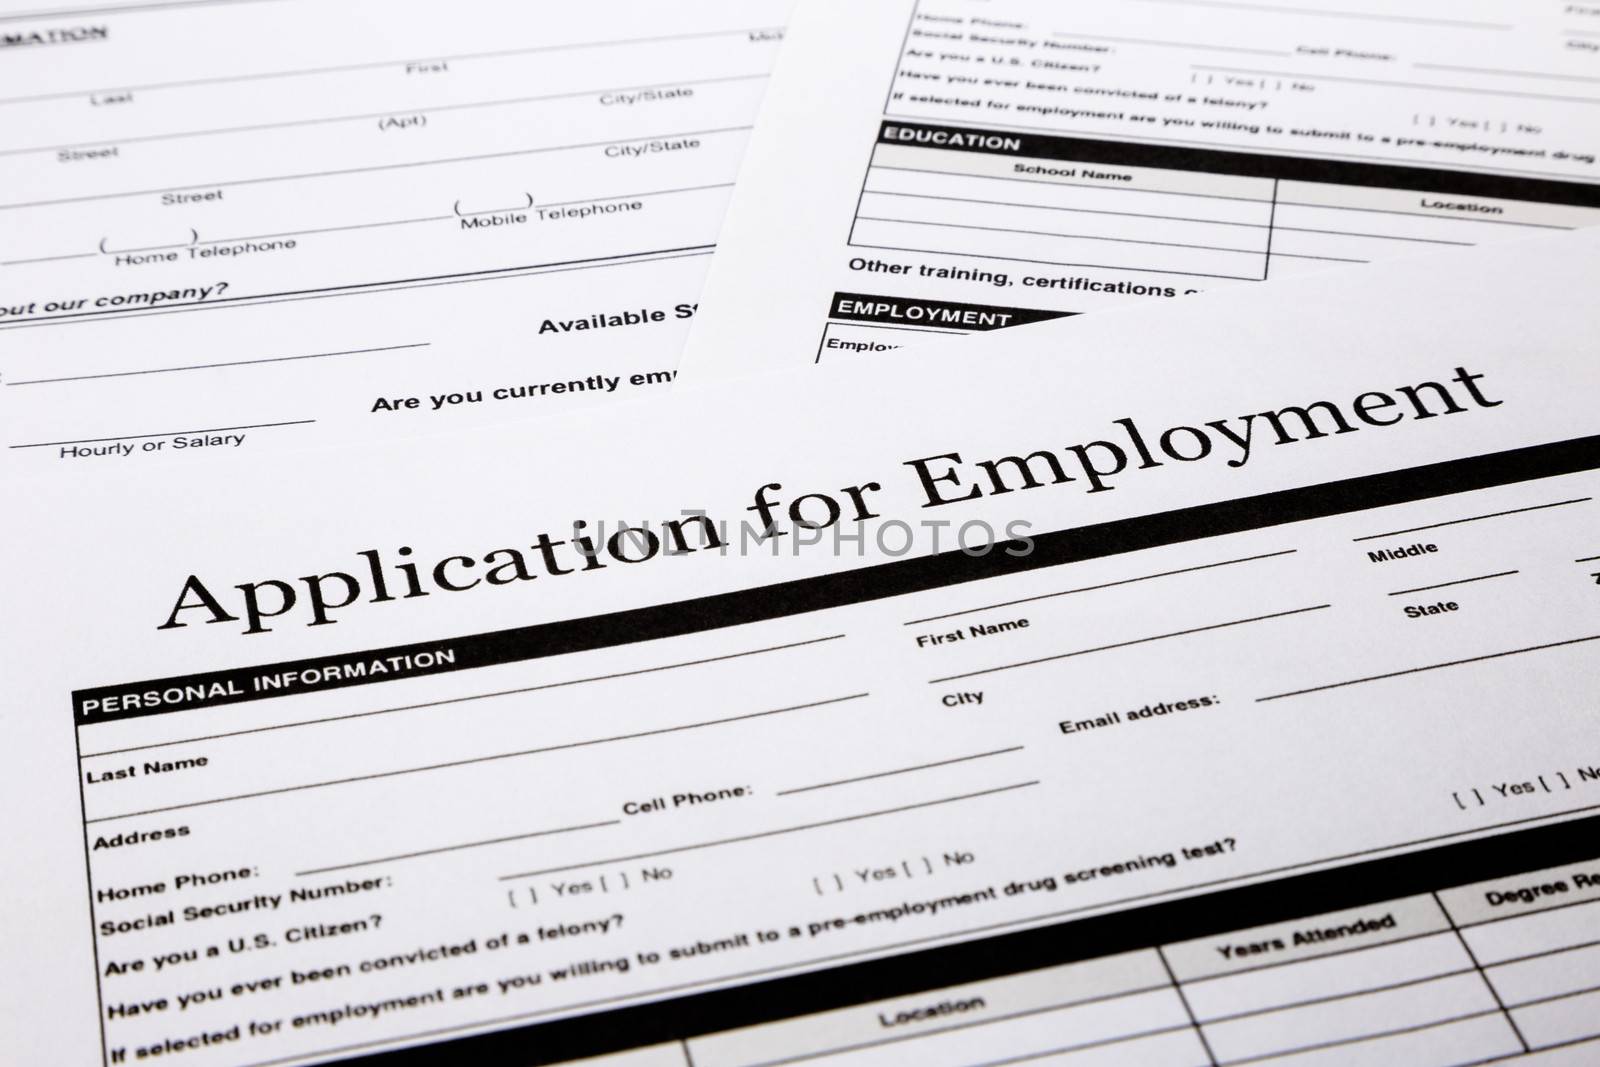 employment application form, human resources and business concepts